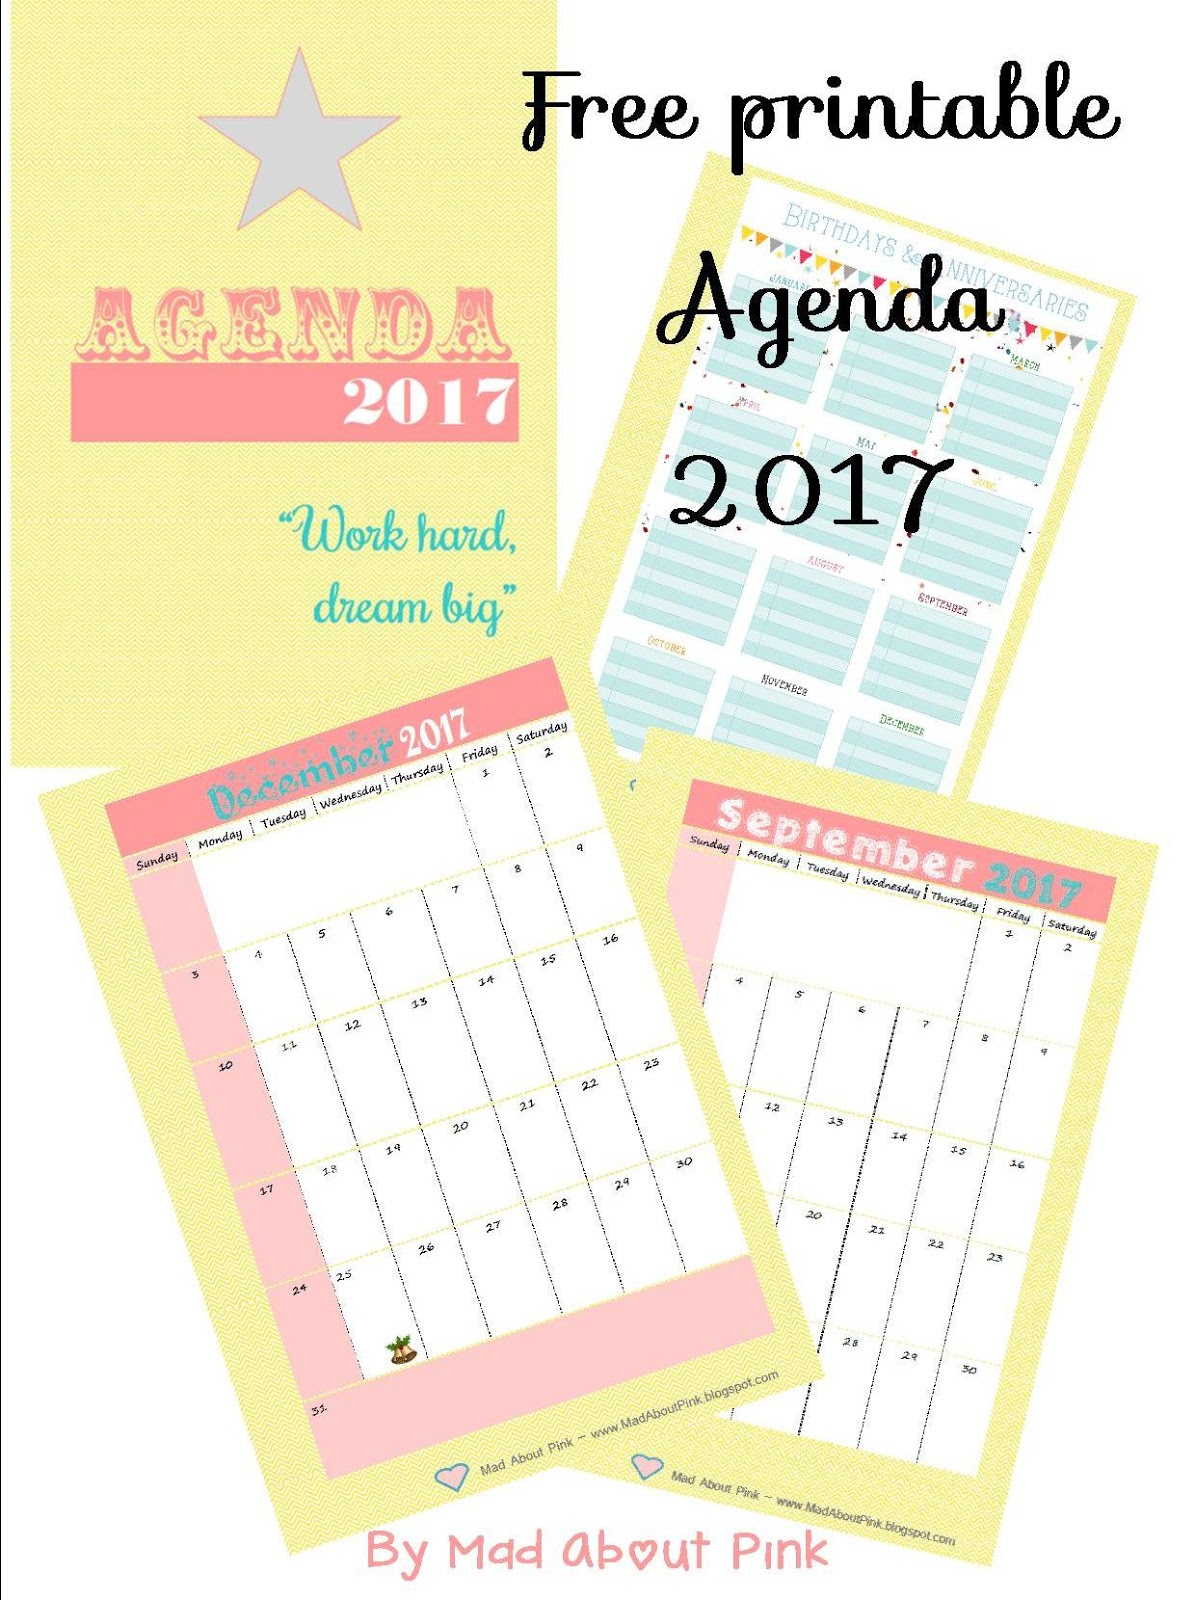 Mad About Pink: Free Printable 2017 Agenda - A4 Format - Free Printable Agenda 2017